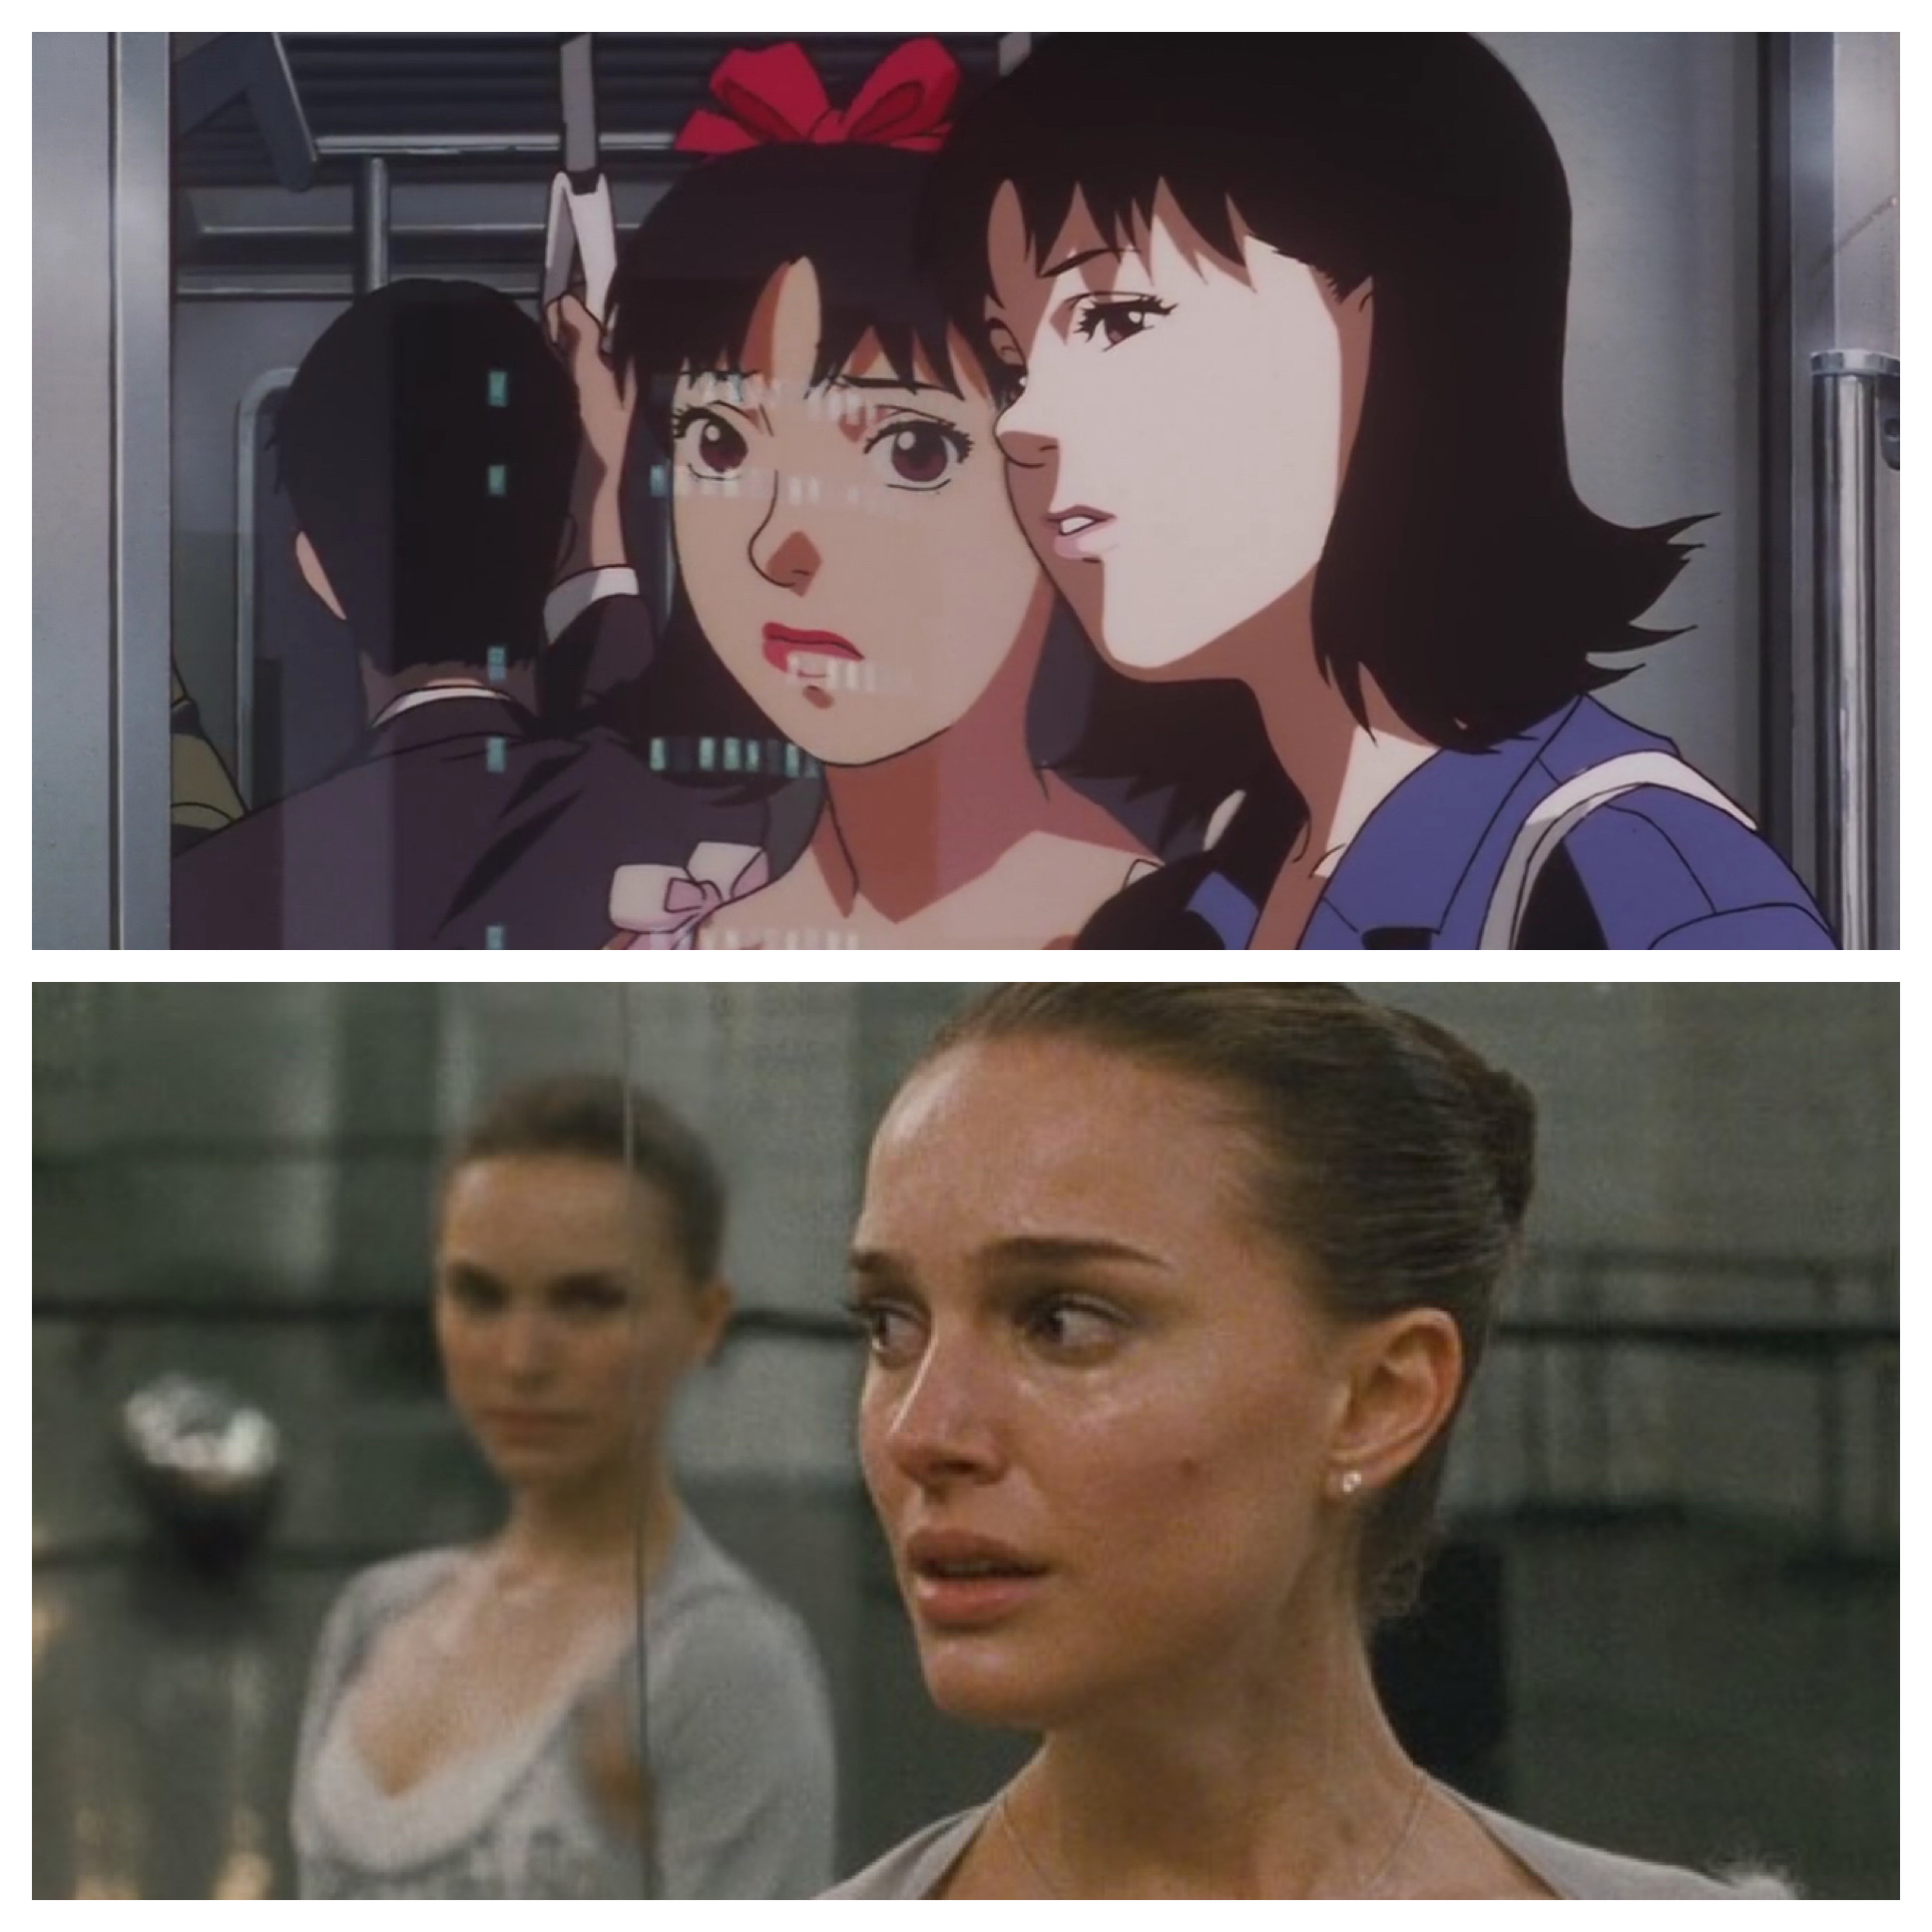 Comparison between 'Perfect Blue' and 'Black Swan'